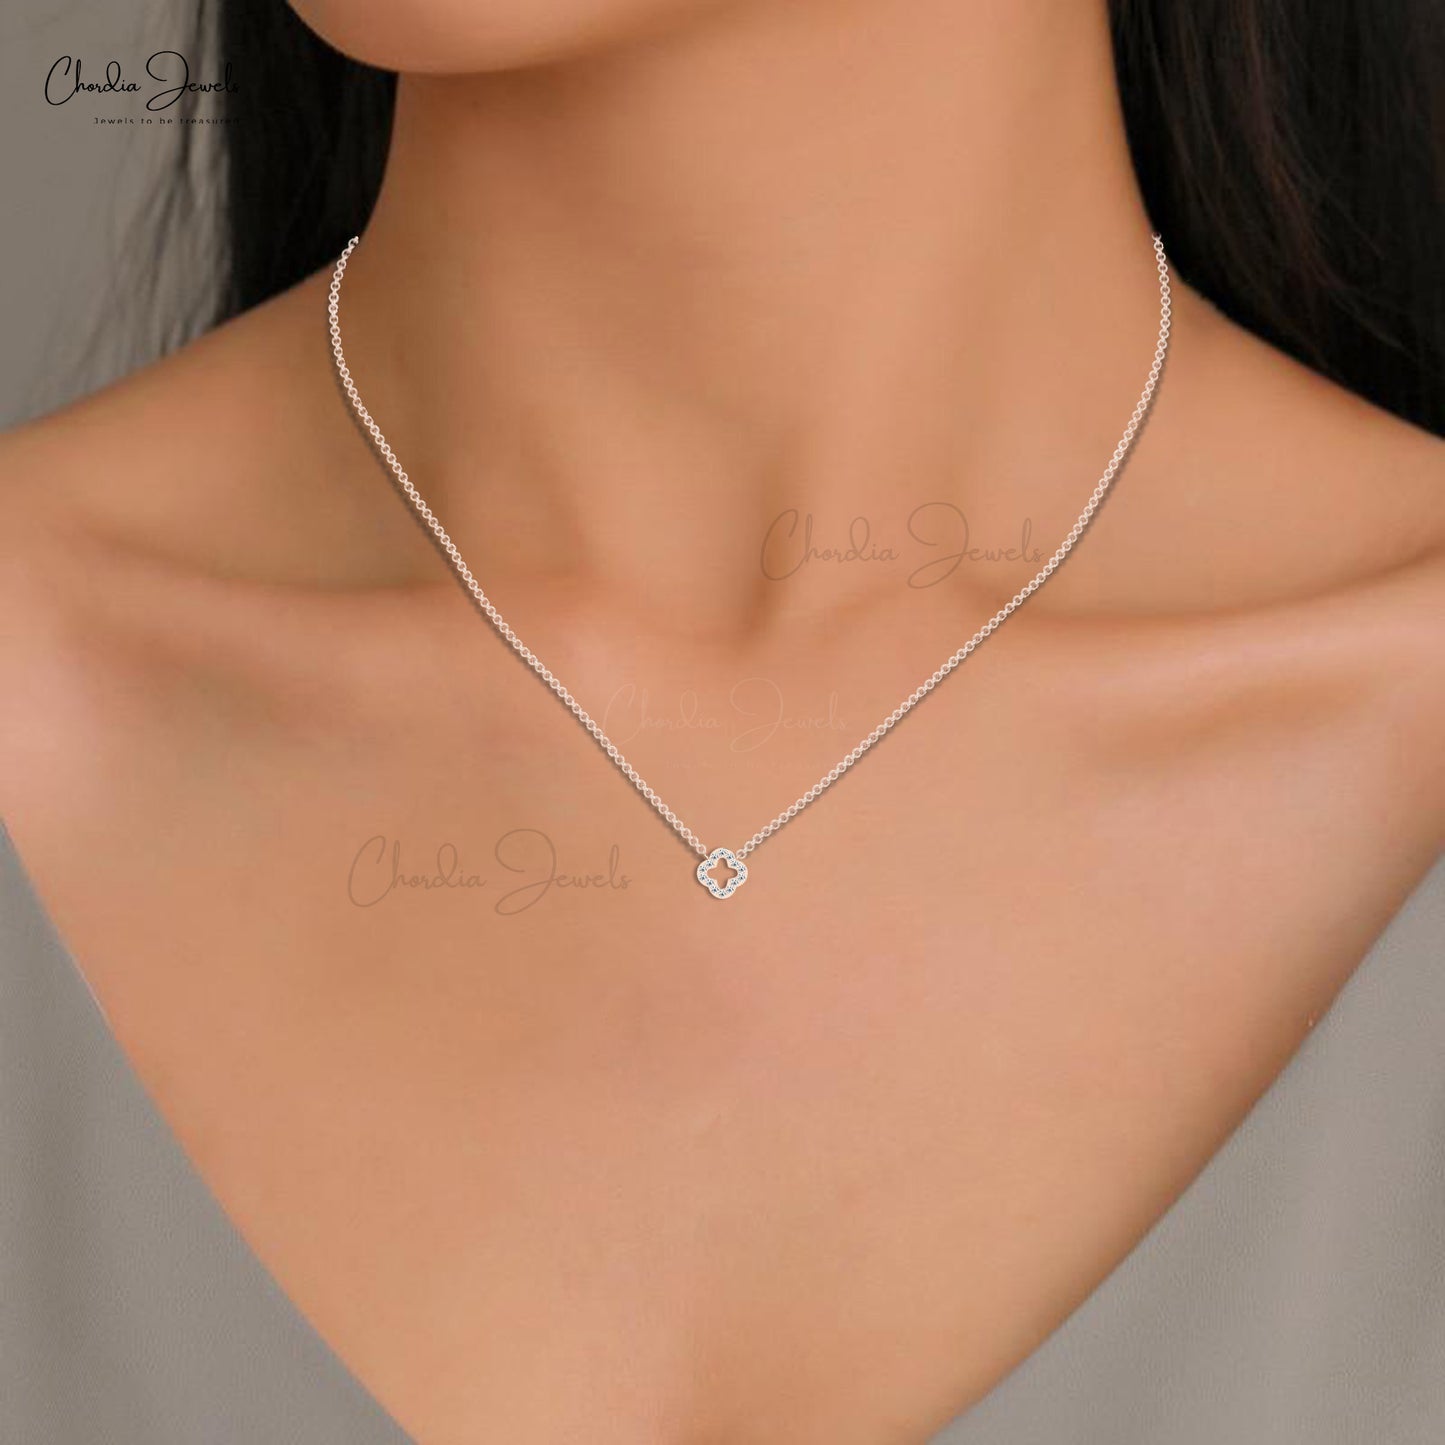 New Design Hot Sale Natural White Diamond Studded Open Clover Necklace Pendant 14k Solid Gold Charm Necklace Valentine's Day Gift For Girlfriend